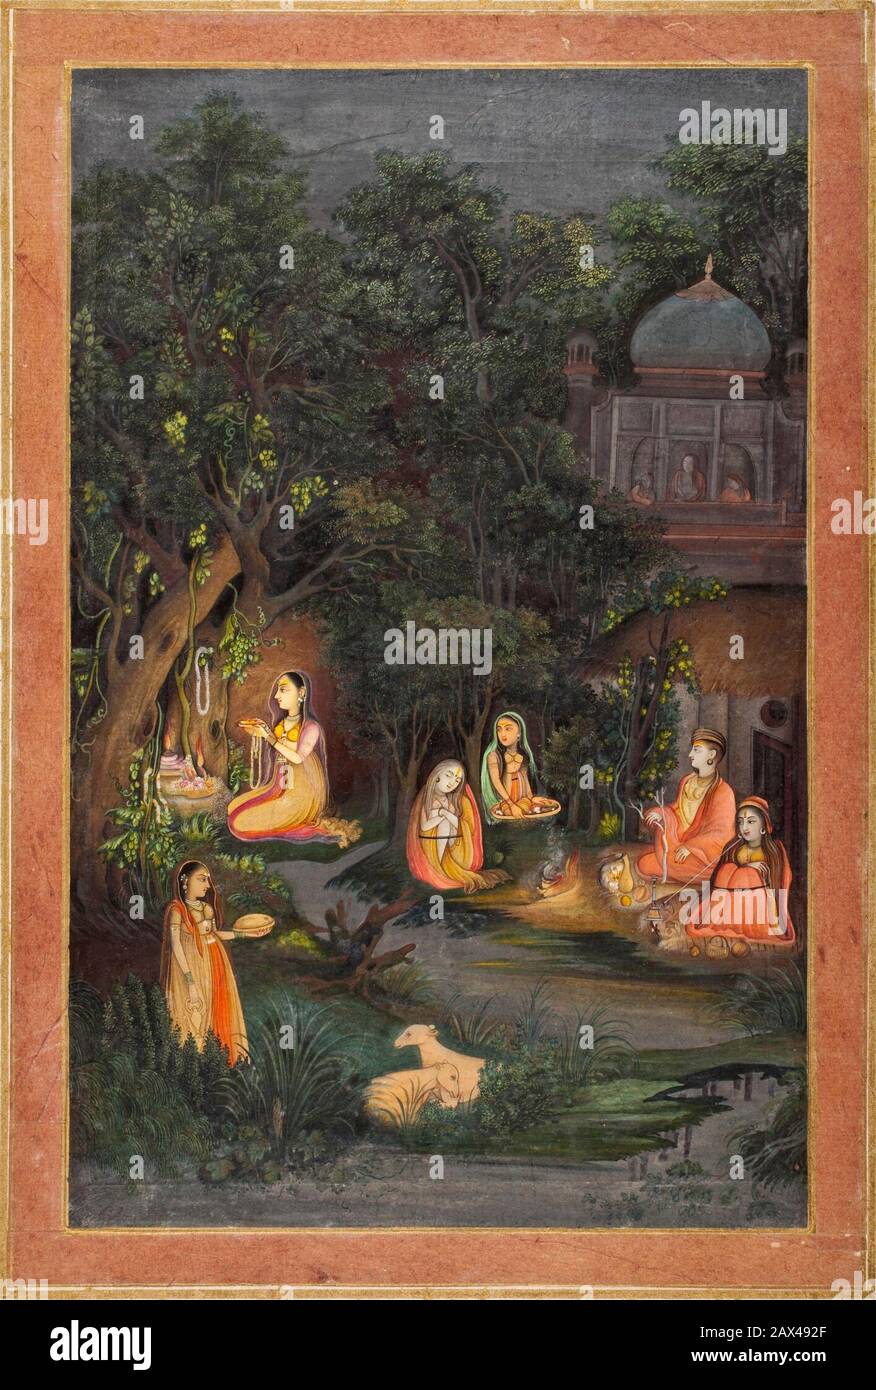 'A Princess Visiting a Forest Shrine at Night (image 2 of 2); English:  India, Uttar Pradesh, Awadh, Lucknow, circa 1760 Drawings; watercolors Opaque watercolor and gold on paper Purchased in memory of Emeritus Professor Roy C. Craven, Jr. with funds provided by the Southern Asian Art Council, Stephen Markel, Lorna Andreae Craven, Pierre Andreae, Jay and Kathleen Craven, Ruth and Bill Beesch, Mark Zebrowski and John Robert Alderman, R. and Dharini Charudattan, Austin B. Creel, Herbert H. Luke, Stephen Barry, Myra L. Engelhardt and Lawrence E. Malvern, Toby Falk, Claire and Earl Hale, Janice Le Stock Photo